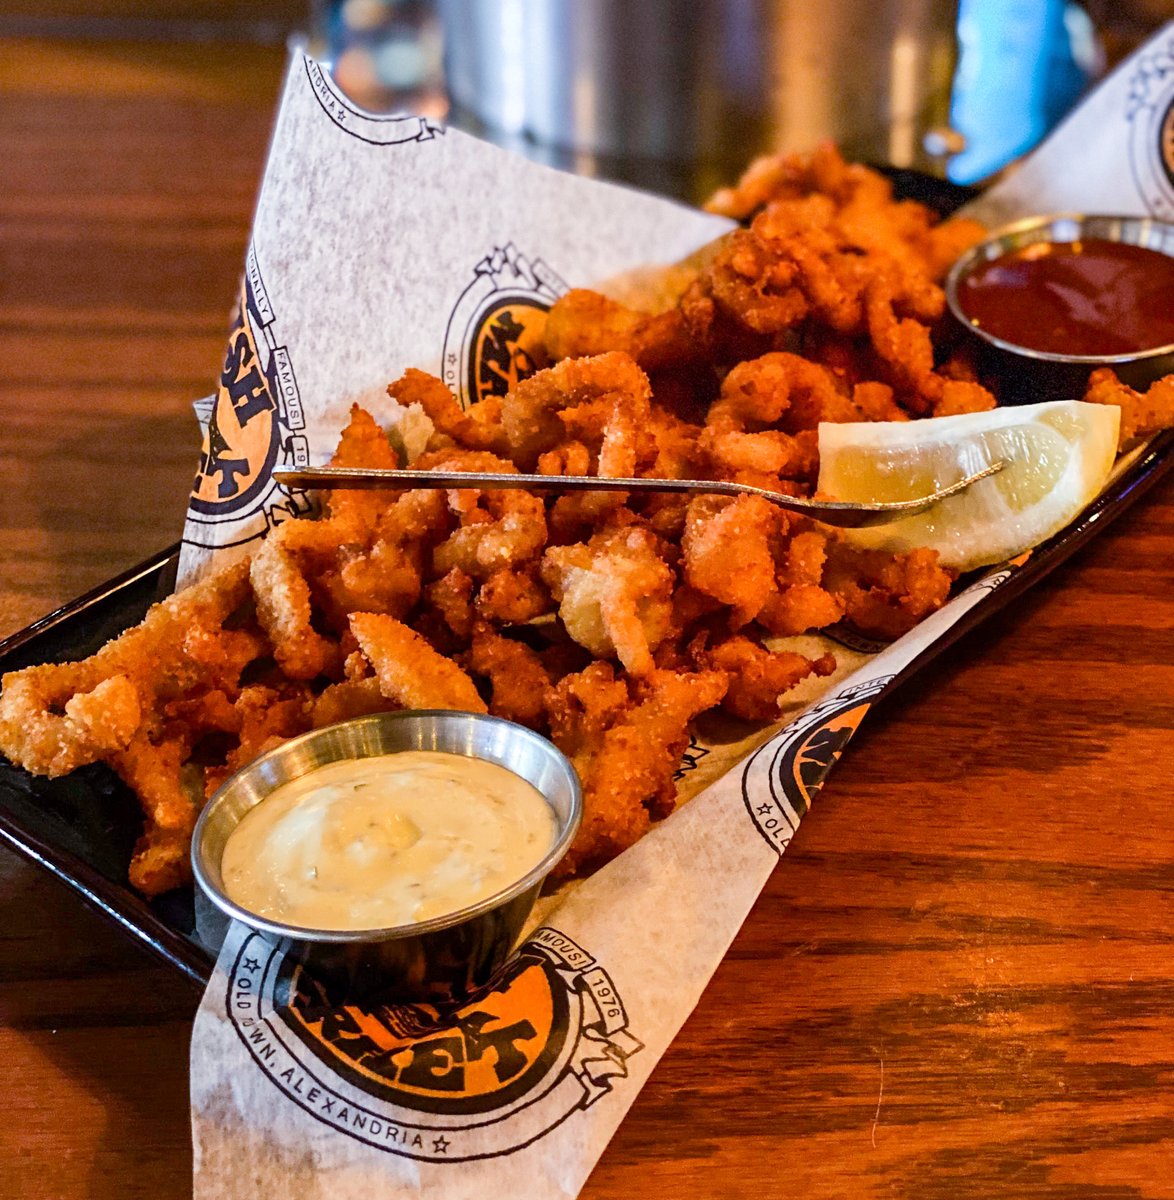 Dive into deliciousness with our crispy clam strips! Crunchy on the outside, tender on the inside – it's a taste of seaside perfection. 🌊 #delivery #supportlocalbusiness #visitalx #seafood #patiodining #fishmarket #ubereats #nomnom #grubhub